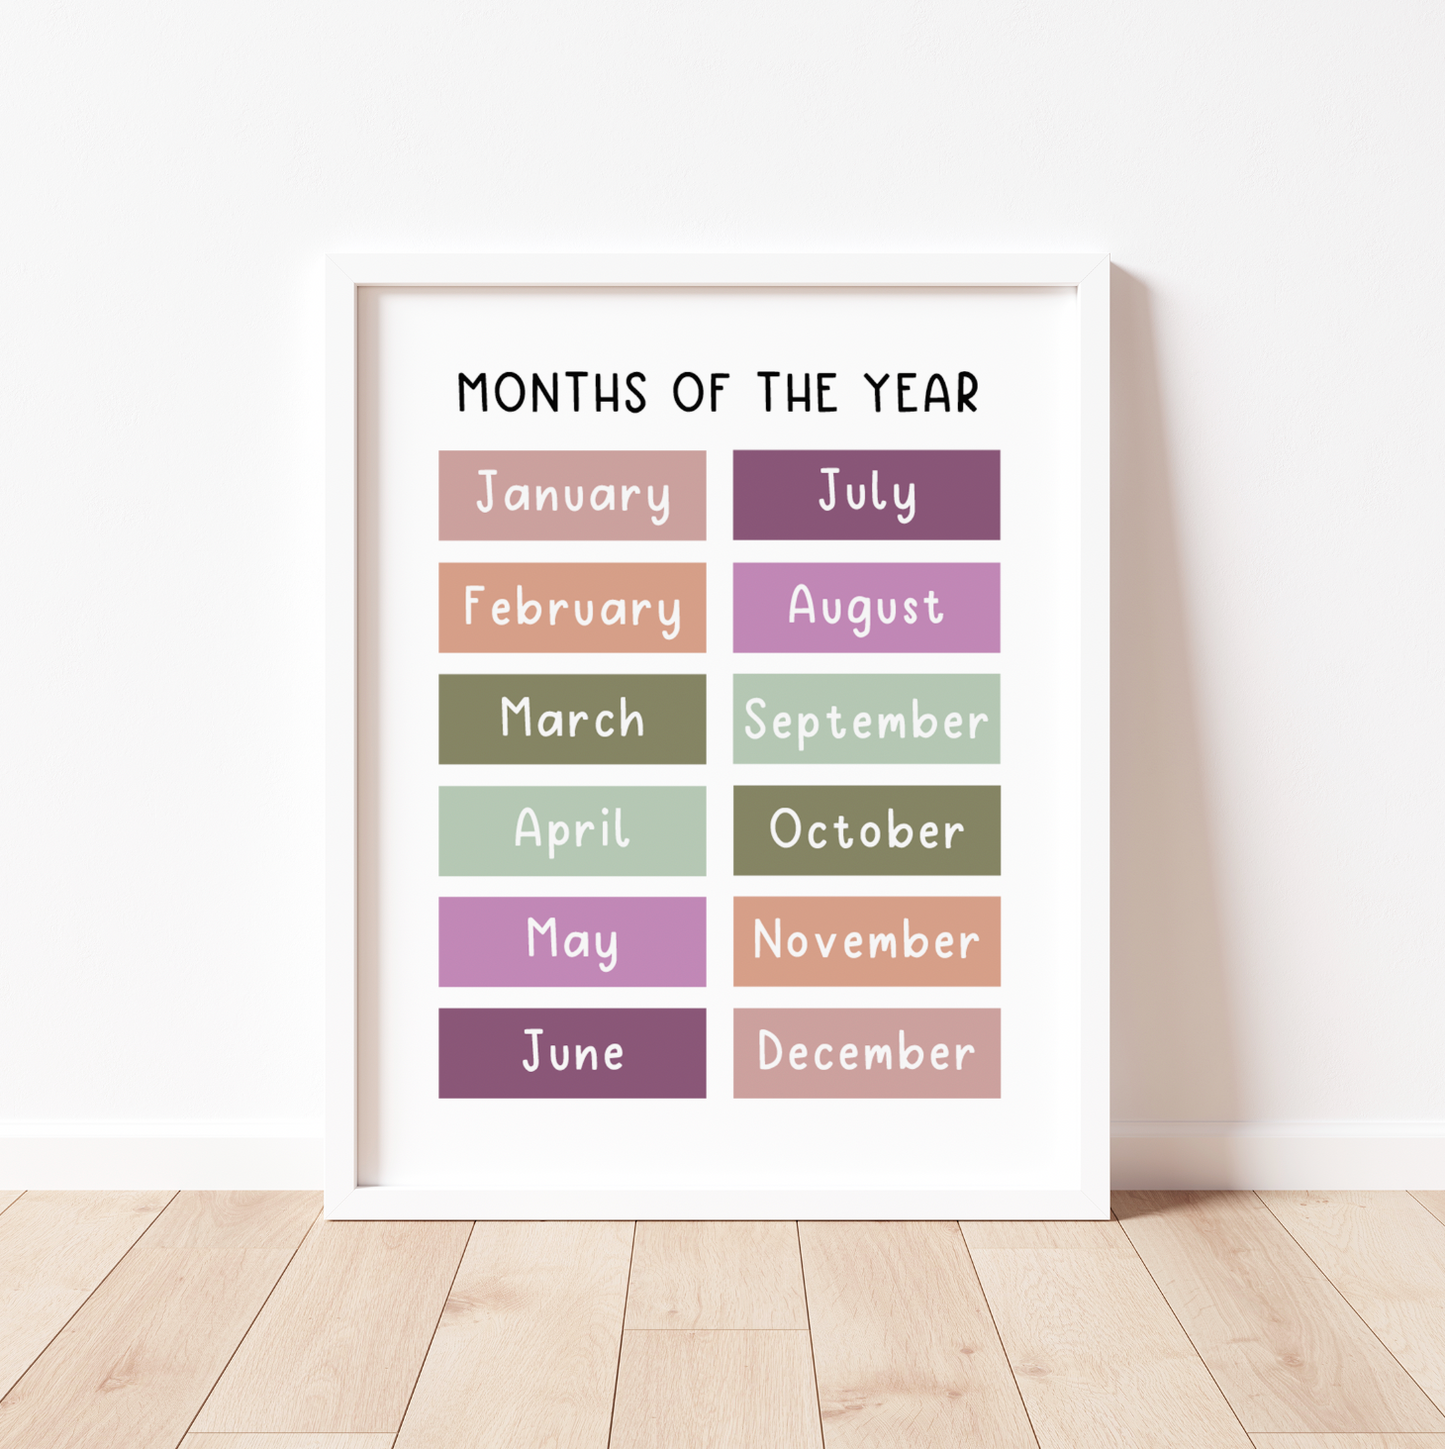 MONTHS OF THE YEAR - Educational Print